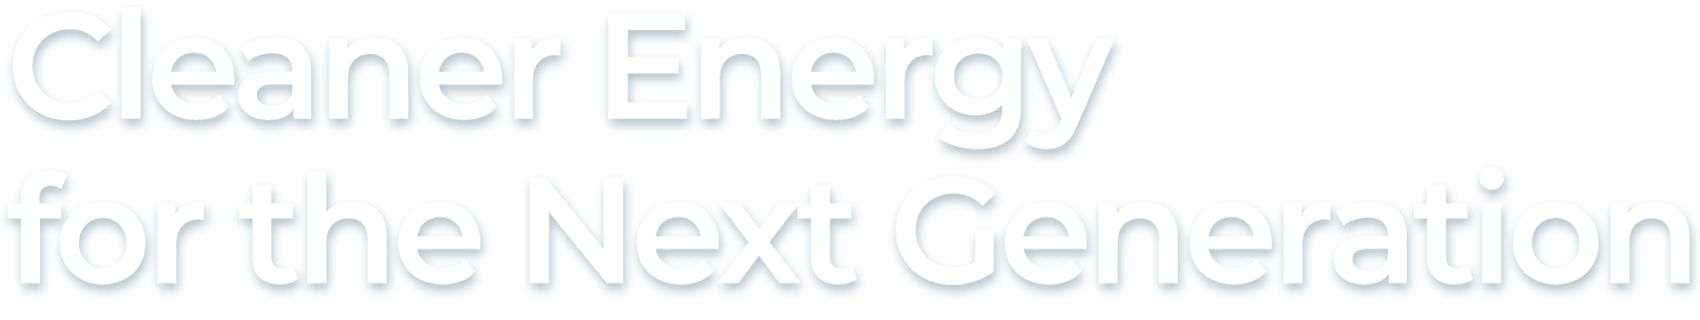 Cleaner Energy for the Next Generation